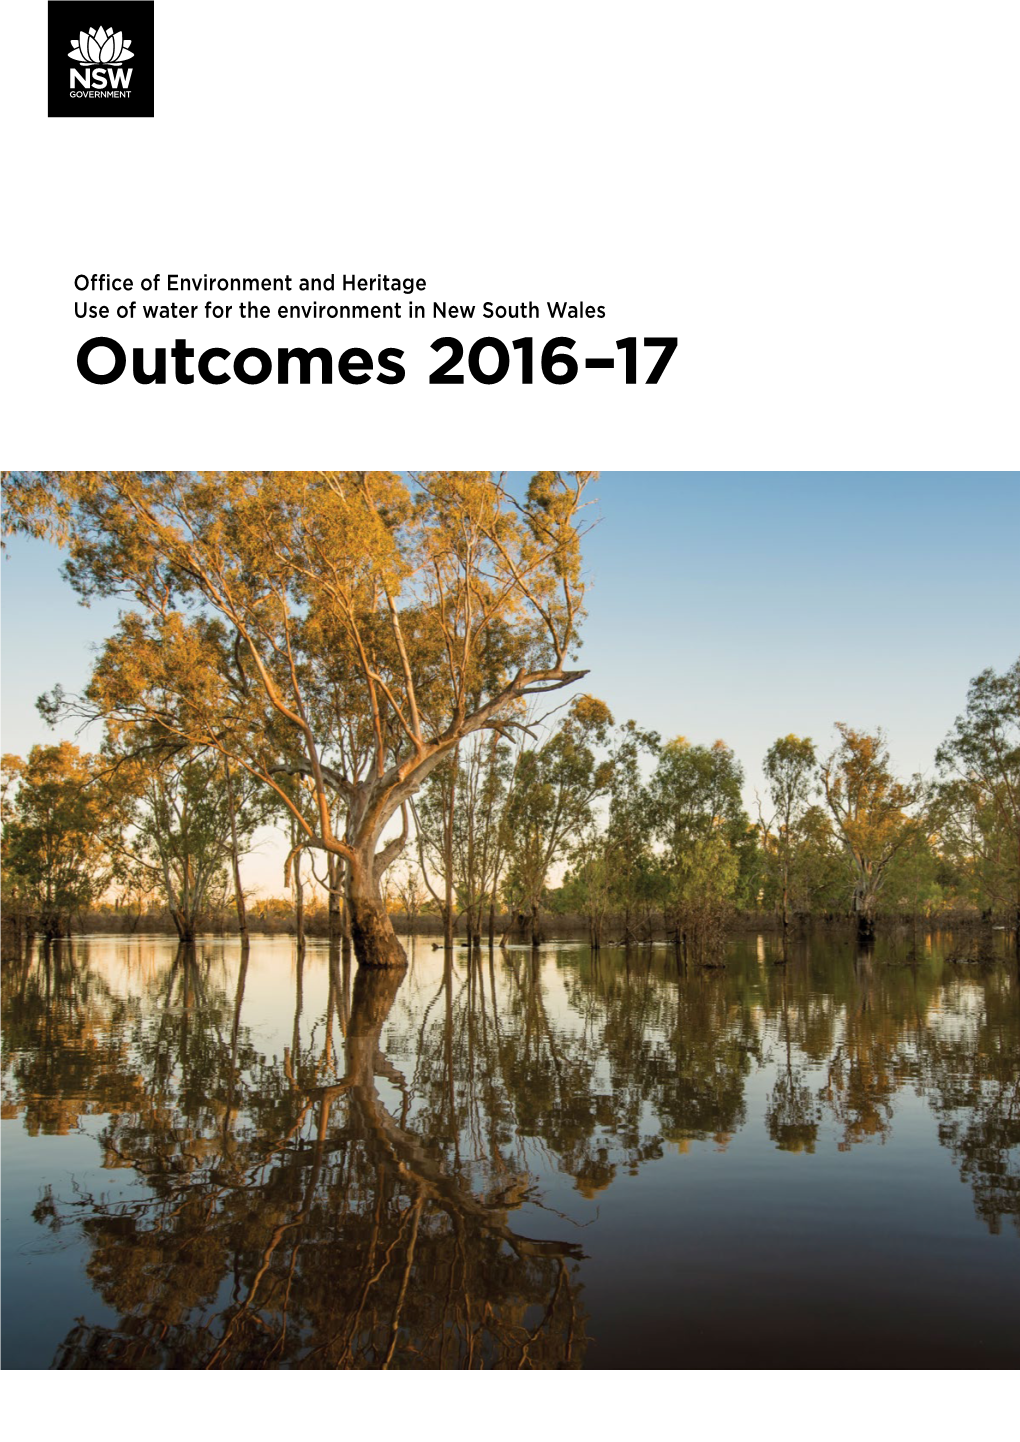 Use of Water for the Environment in NSW: Outcomes 2016-17Download